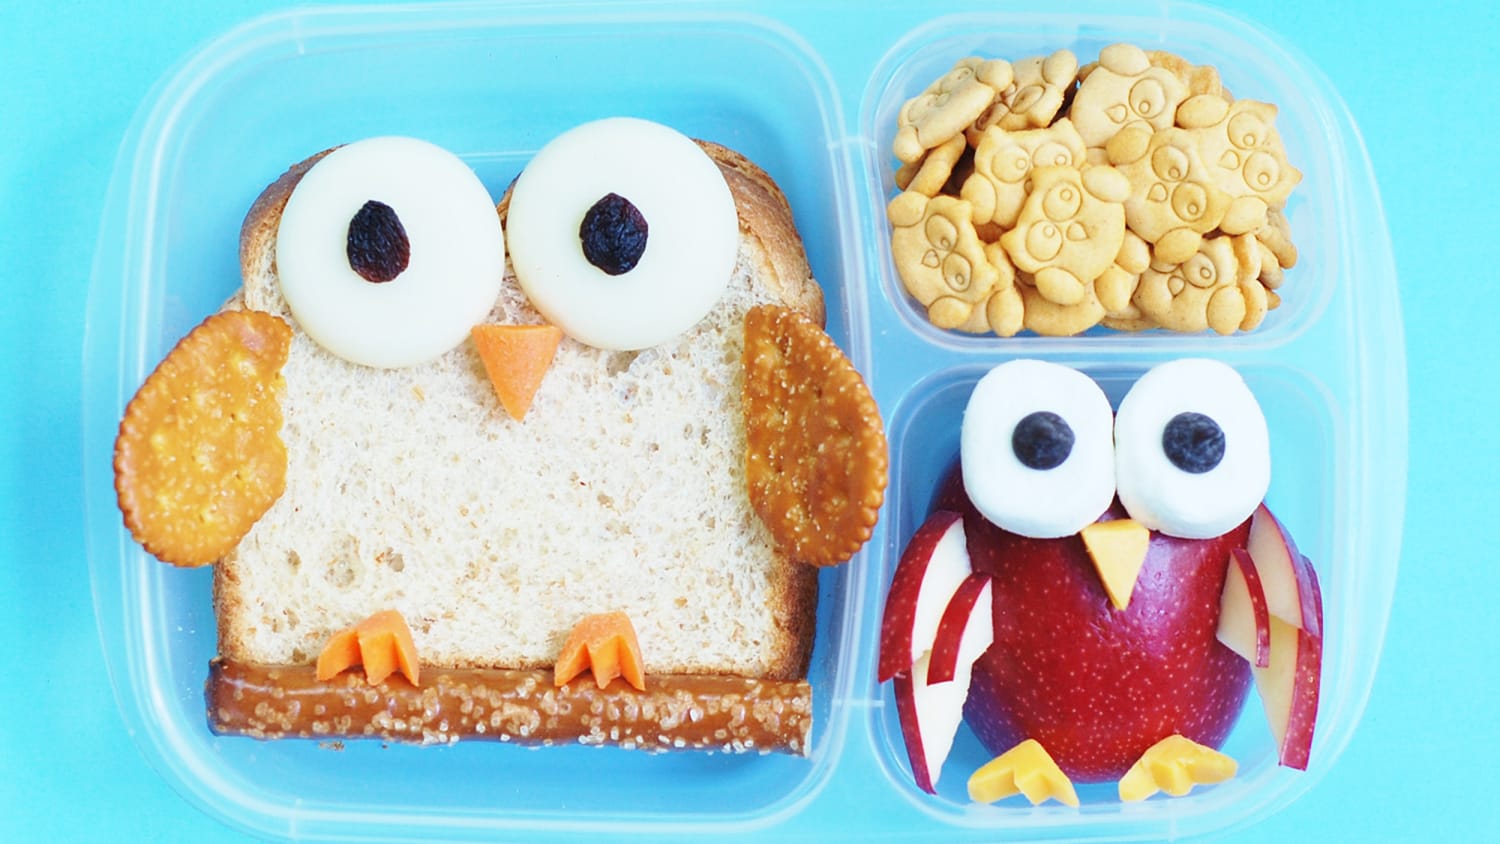 5 Cute And Creative Bento Box Lunch Ideas For Kids